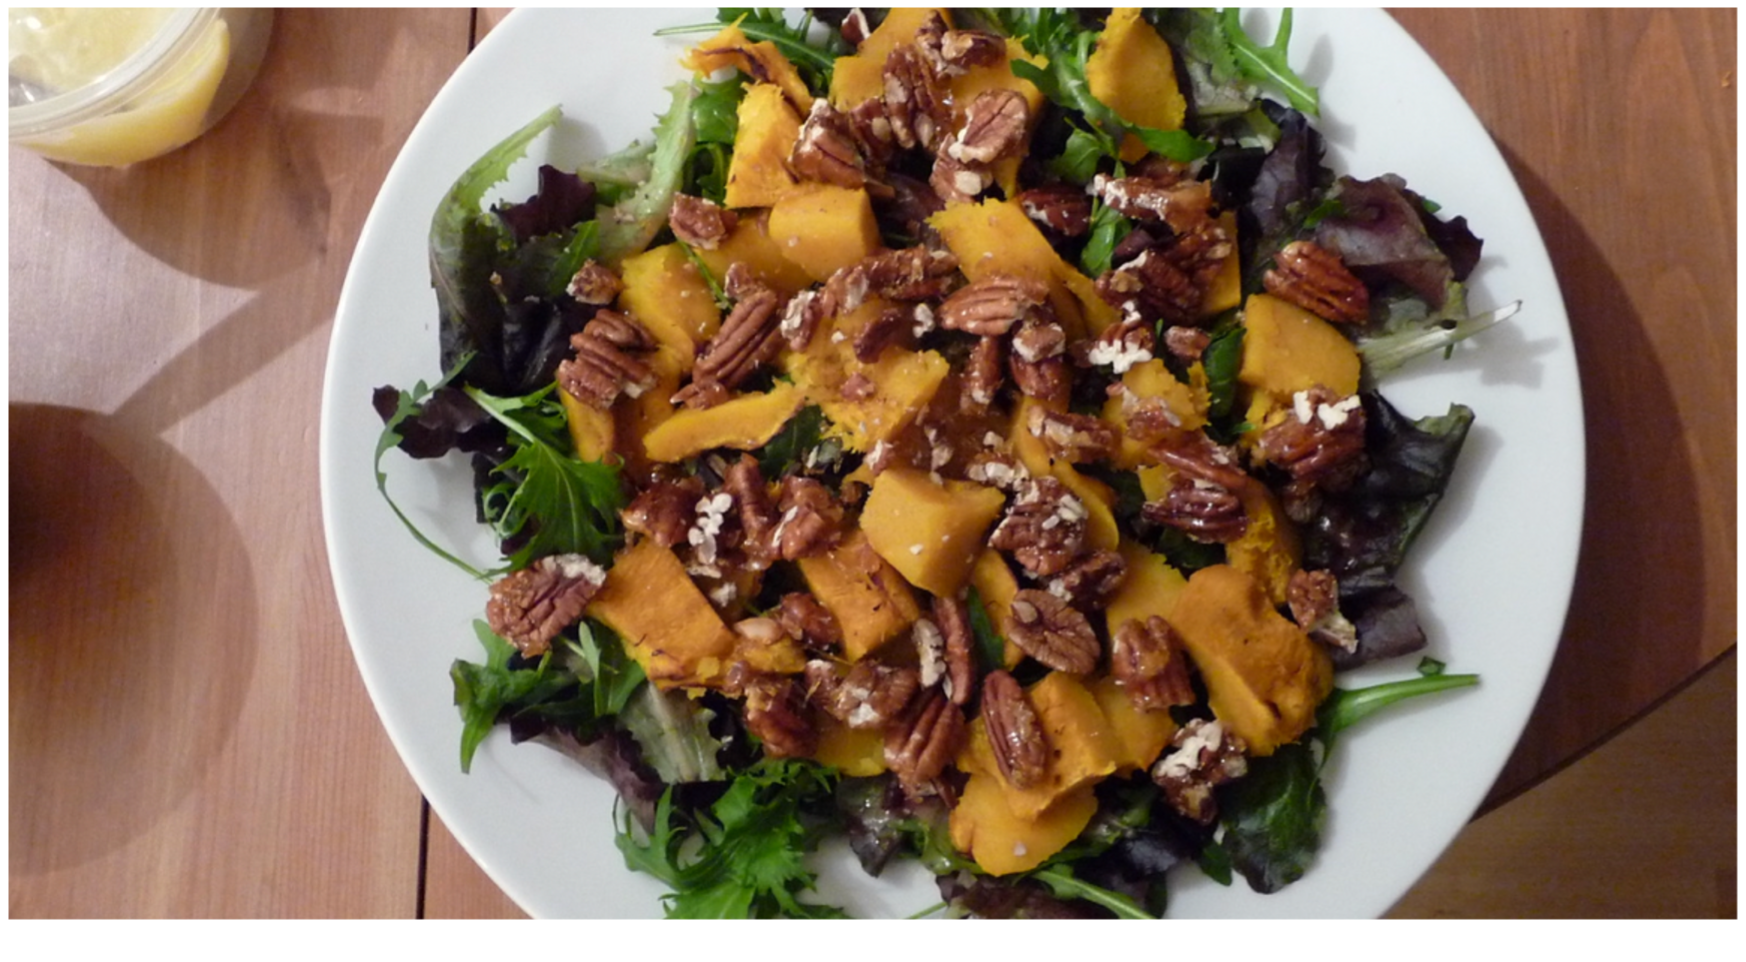 Roasted butternut squash, rocket and sugared pecan salad by Elin B from flickr.com